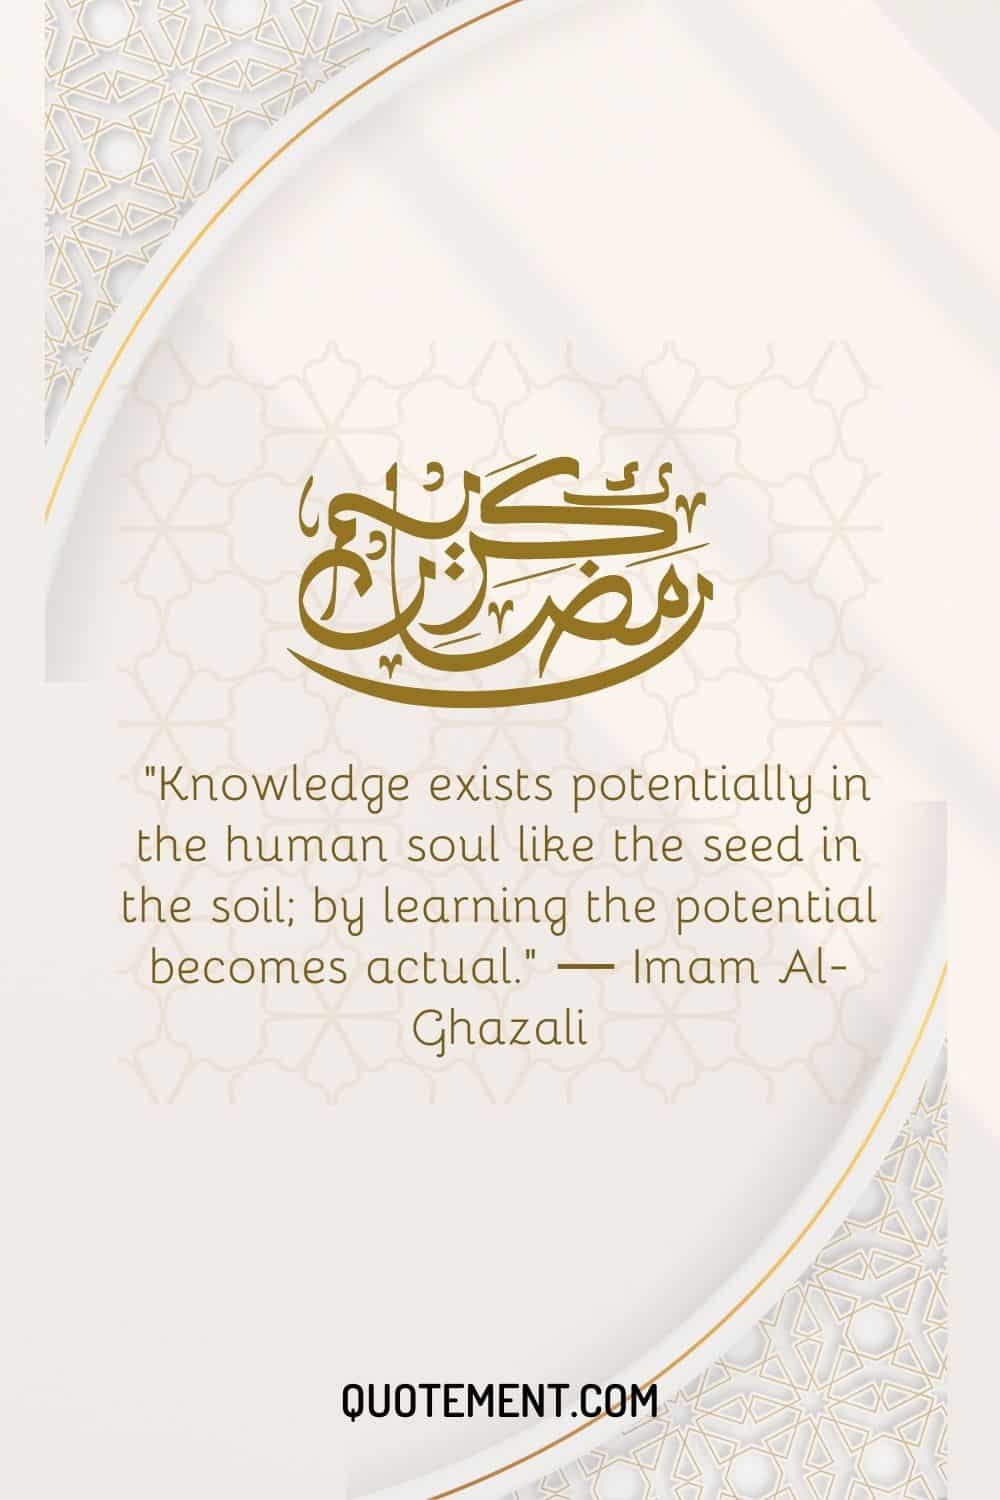 Knowledge exists potentially in the human soul like the seed in the soil; by learning the potential becomes actual